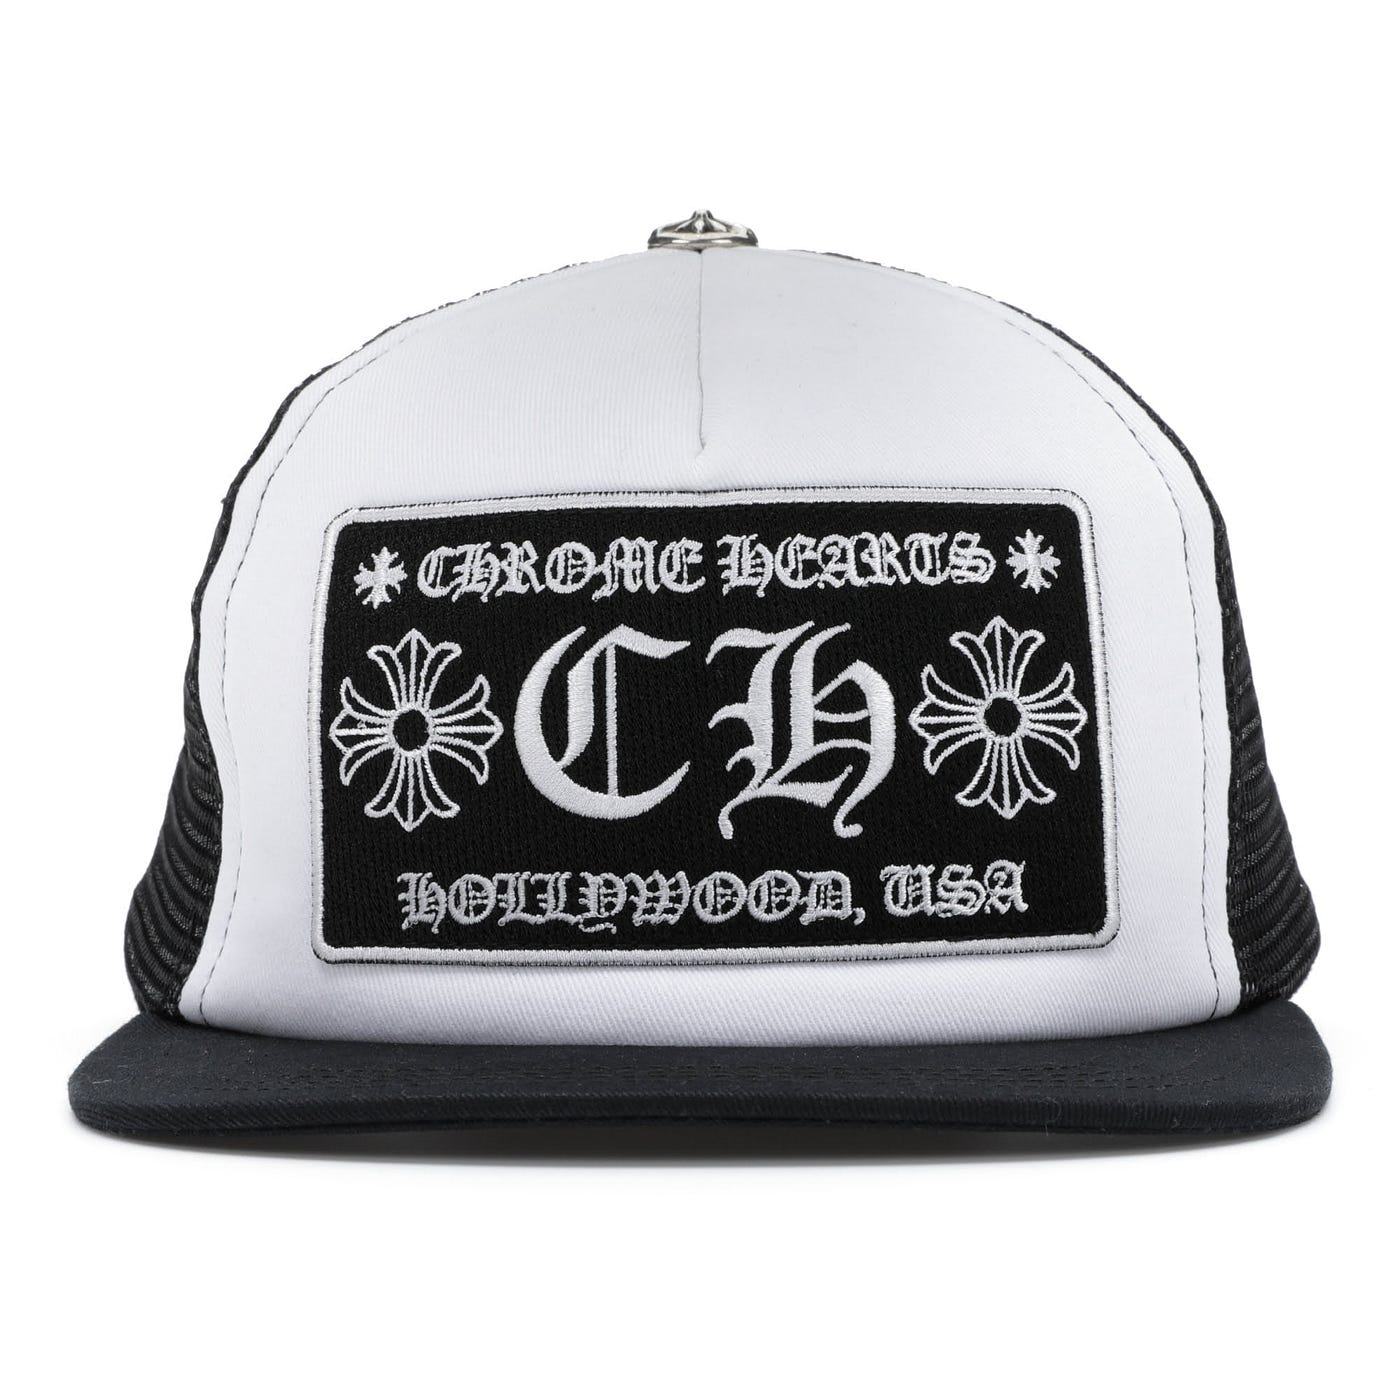 Rev Up Your Style with the Chrome Hearts Trucker Hat: Unleash Your